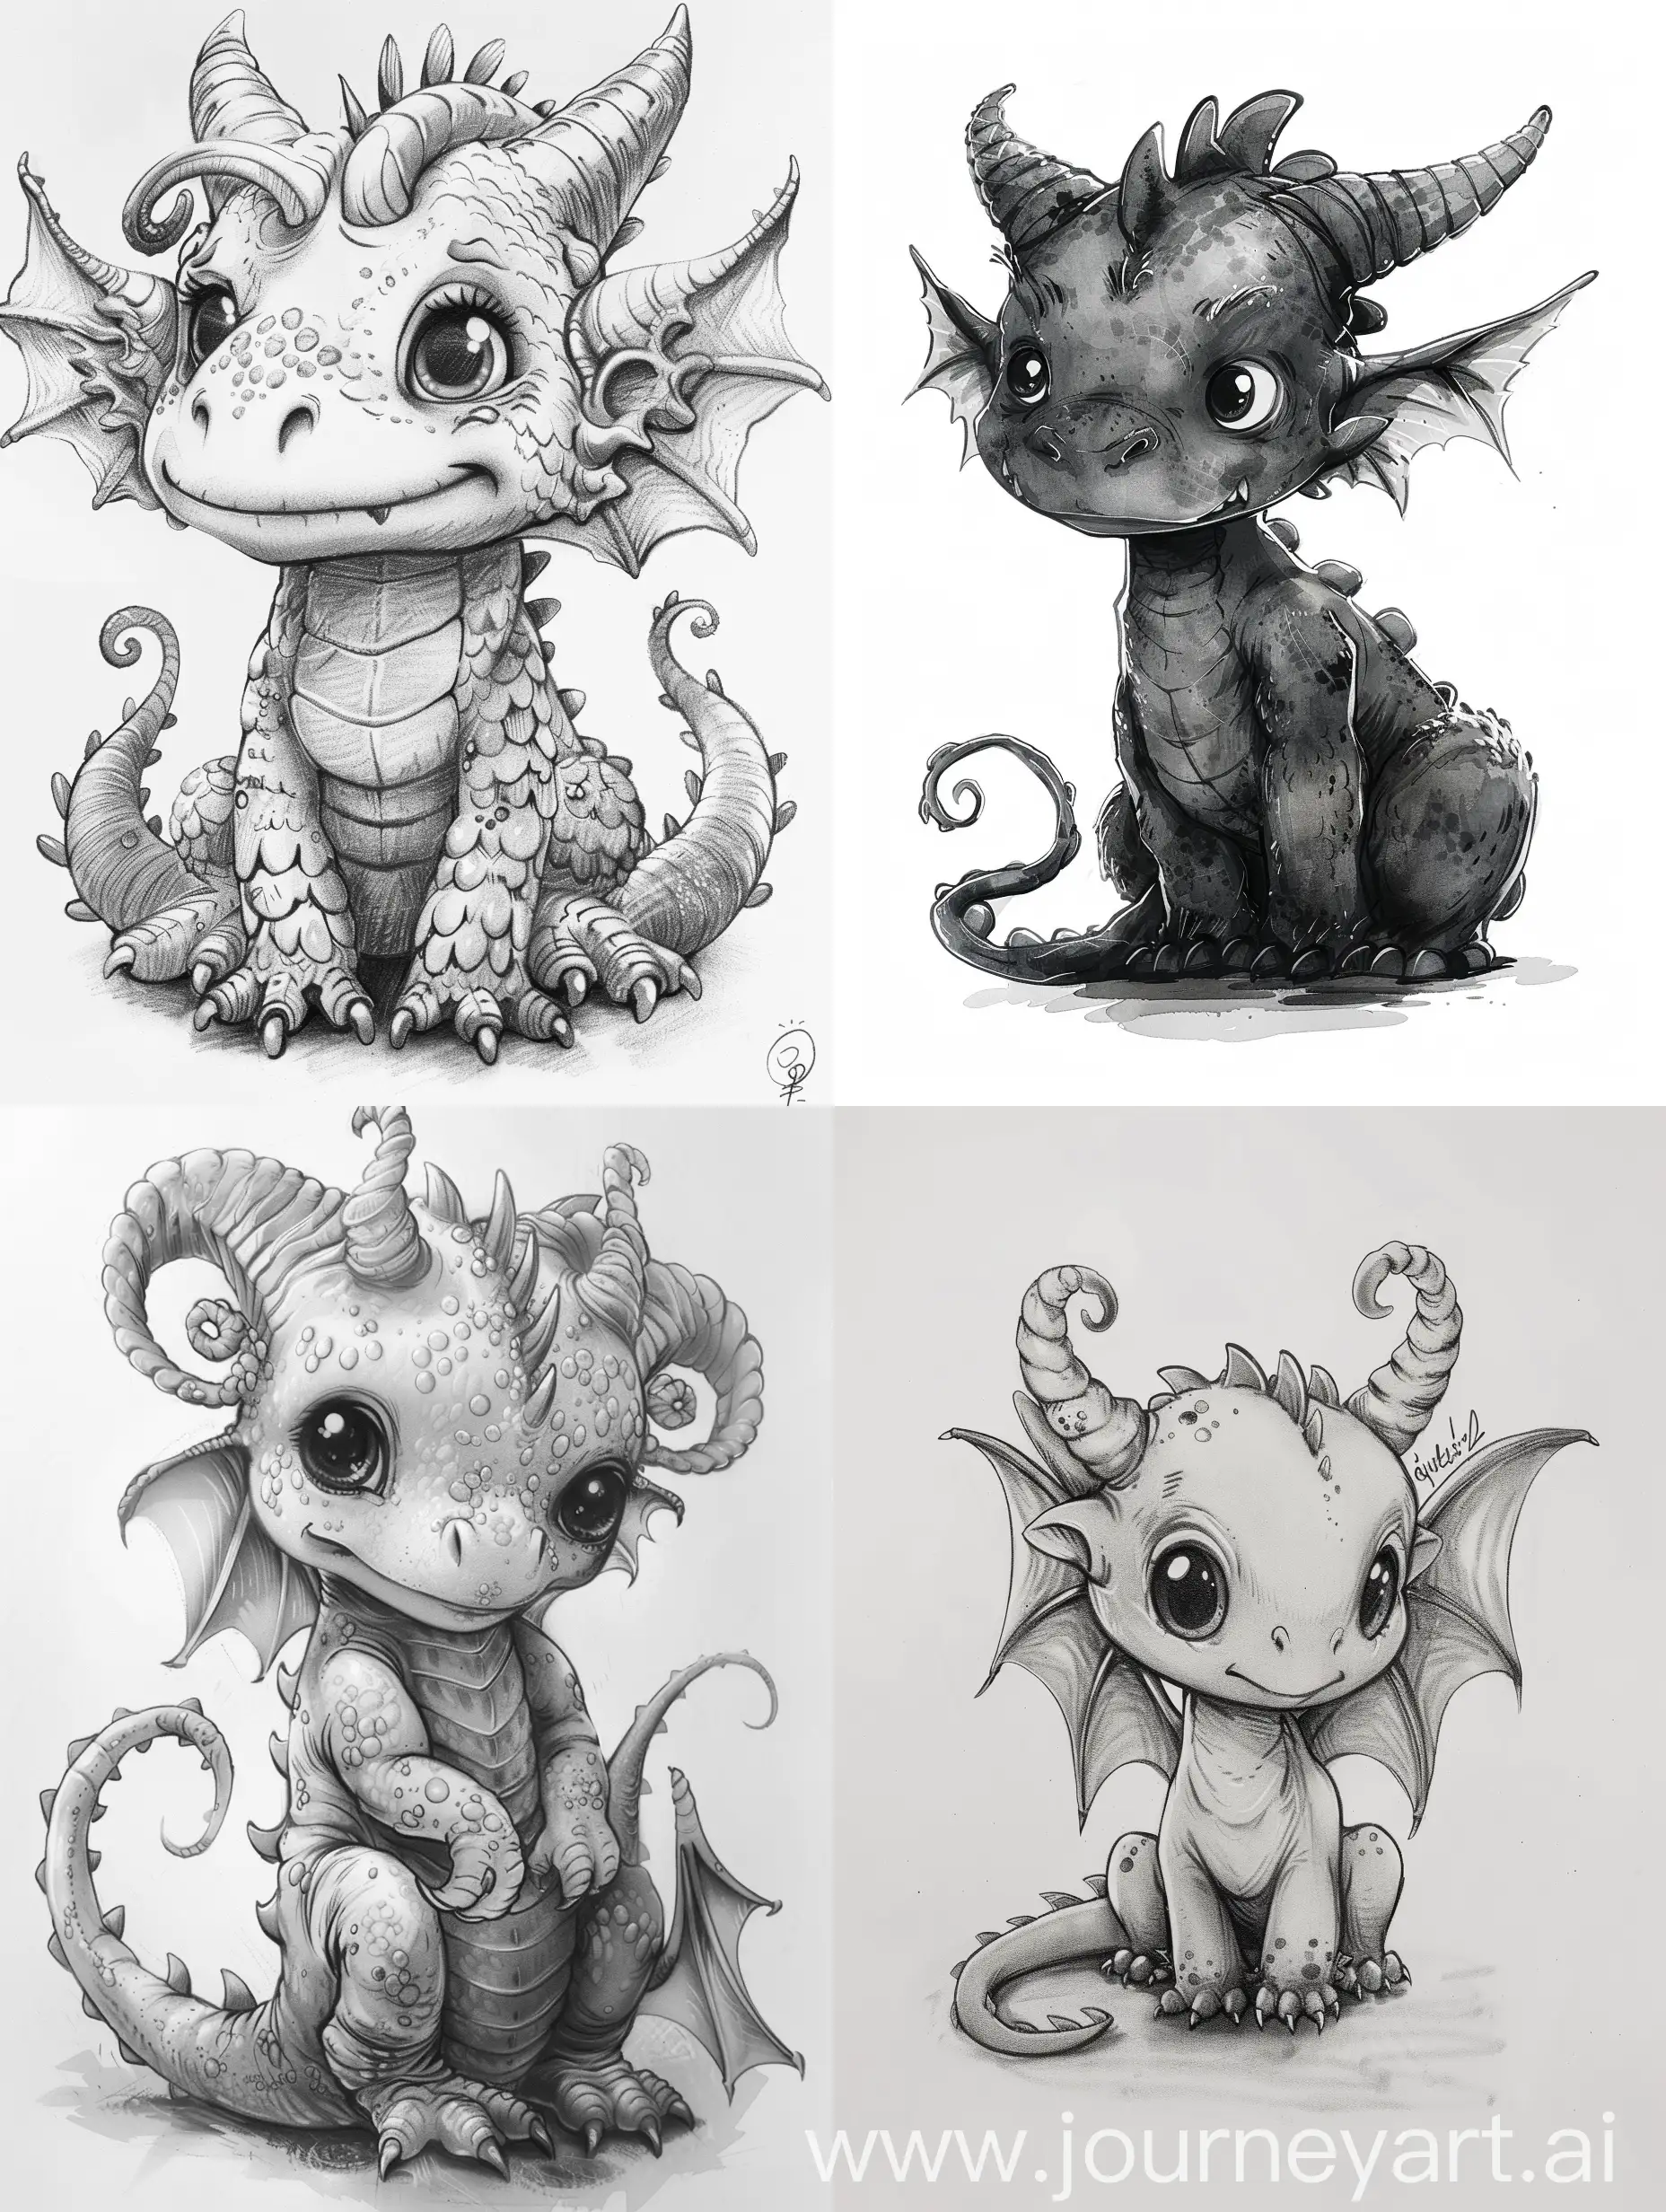 Adorable-6YearOld-Manga-Dragon-with-Curled-Horns